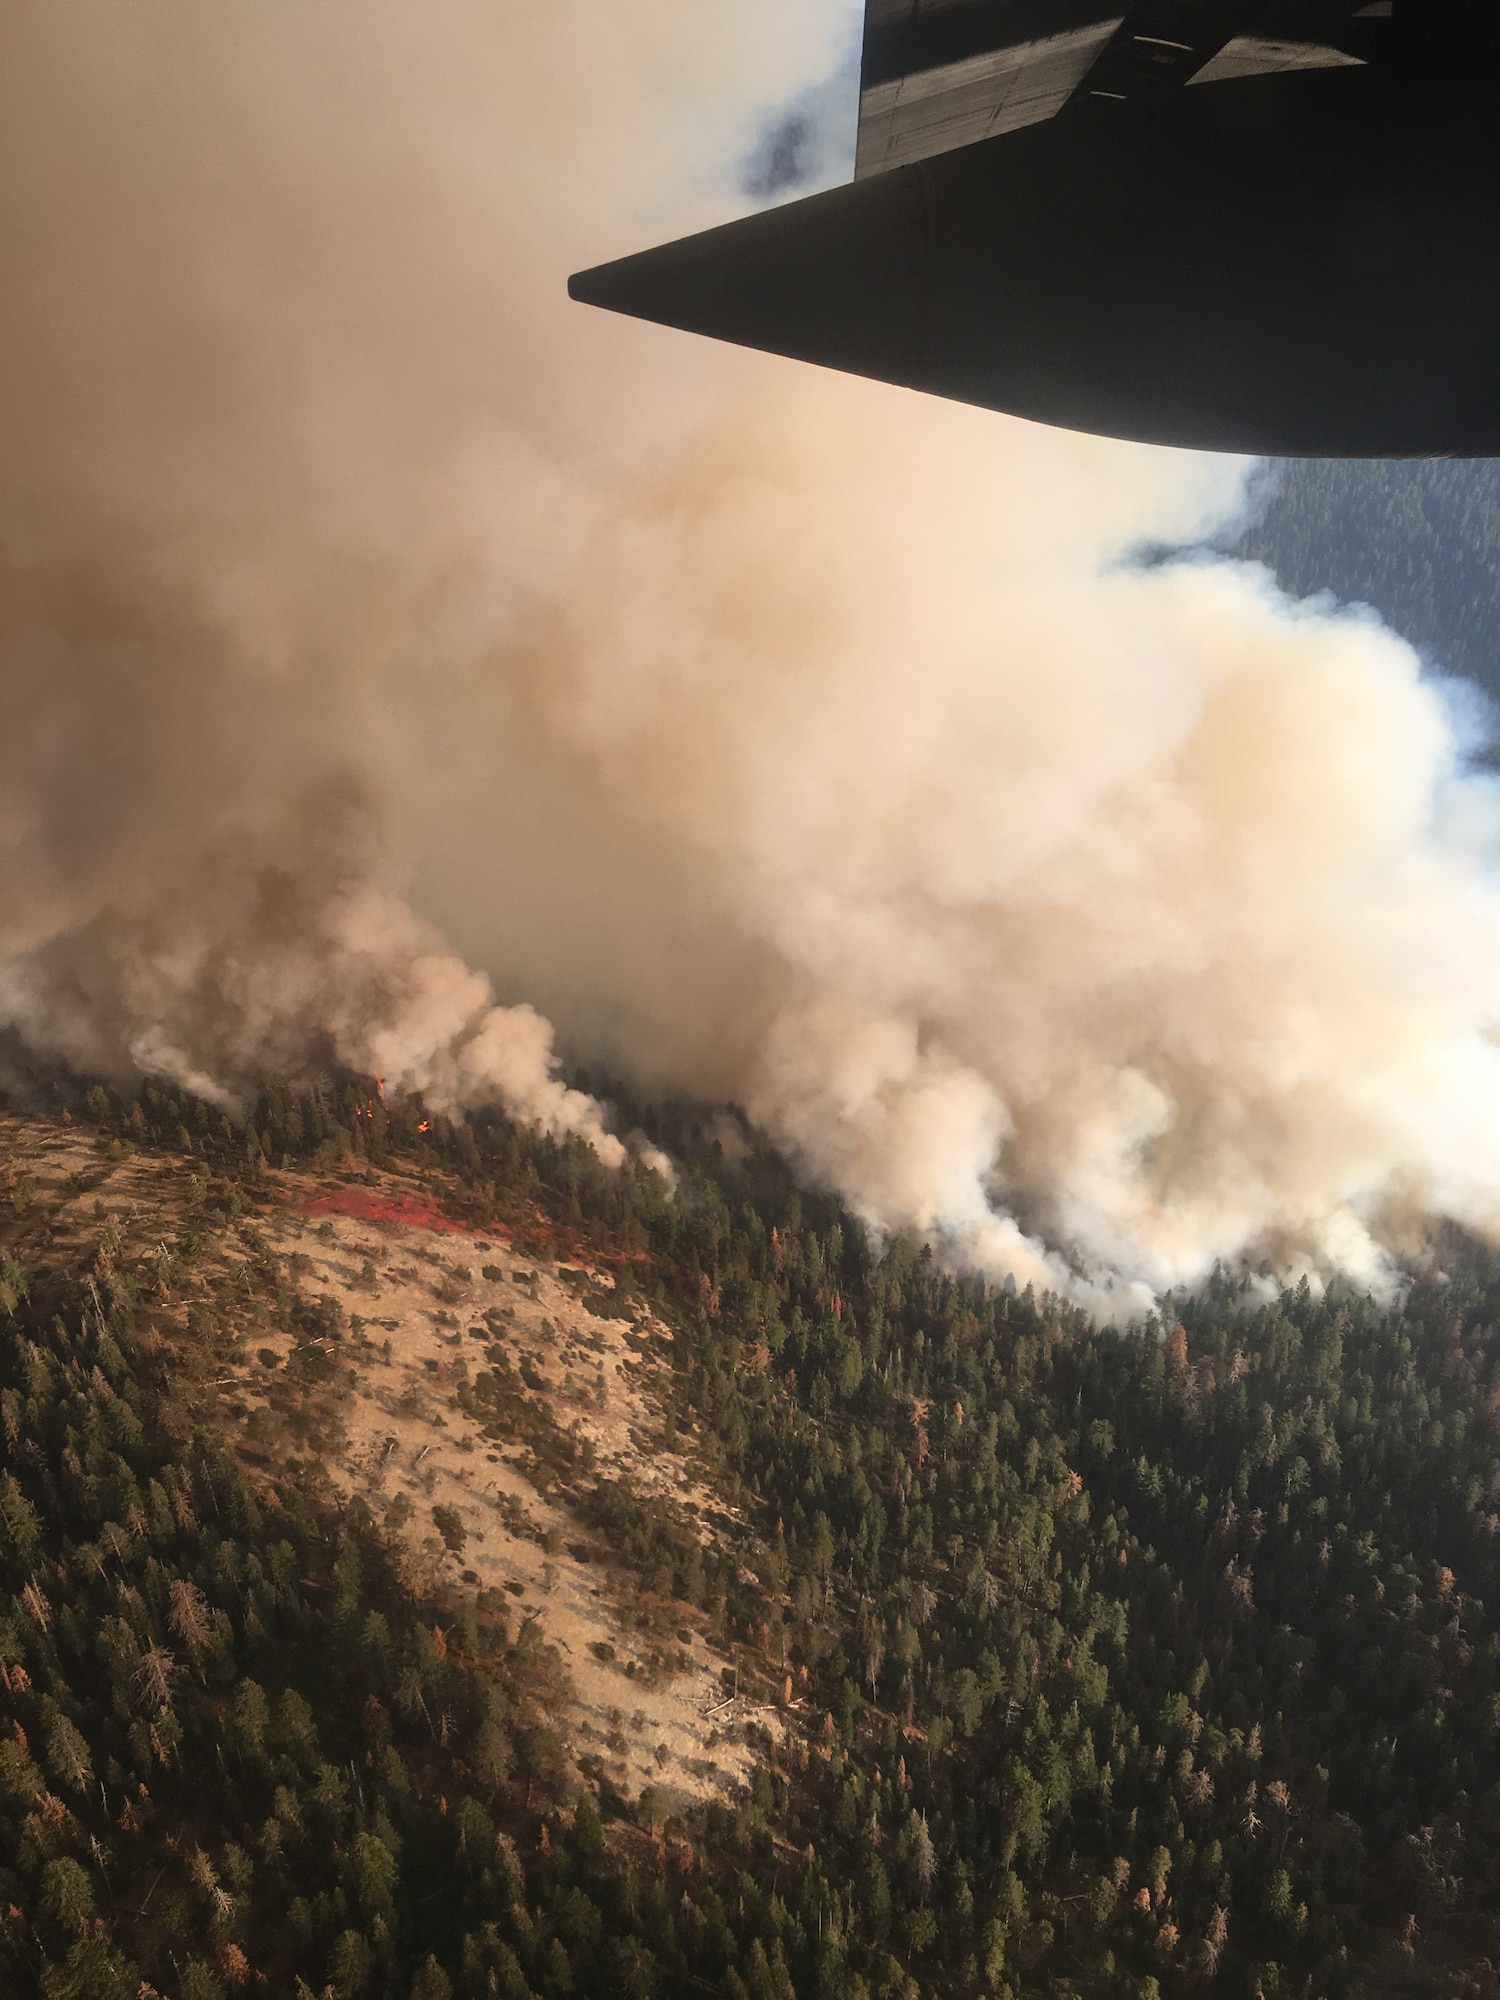 Smoke and the start of a fire retardant containment line dropped by a Modular Airborne Fire Fighting System-equipped C-130 Hercules aircraft near California’s South Fork Fire, south of Yosemite National Park are visible from MAFFS 5, Aug. 14, 2017.